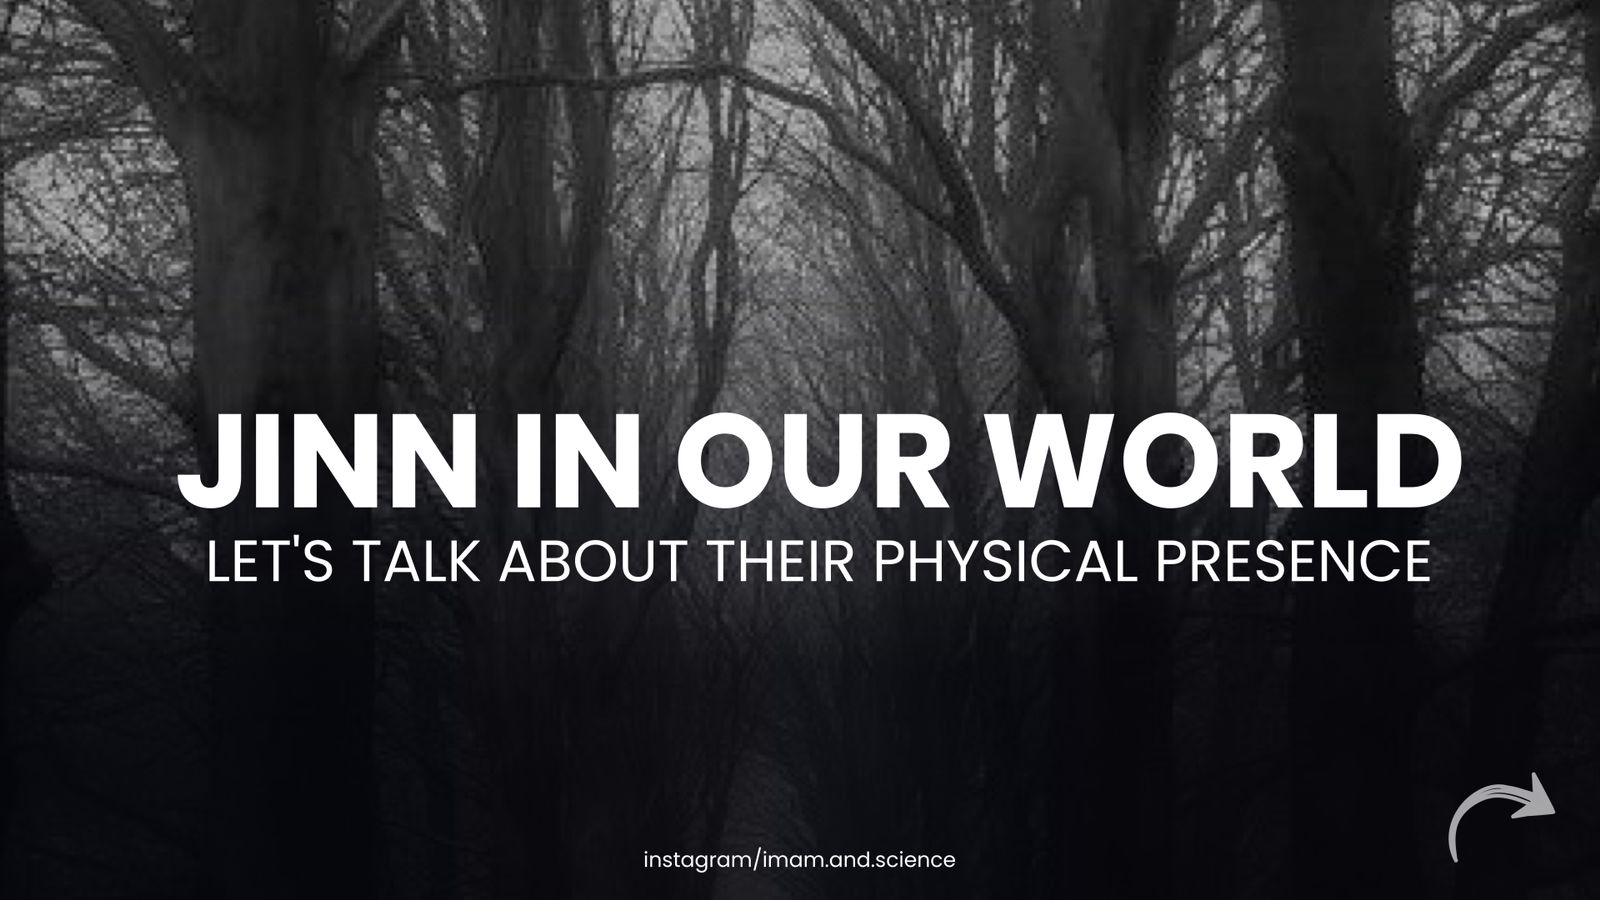 Jinn in Our World: Let's Talk About Their Physical Presence